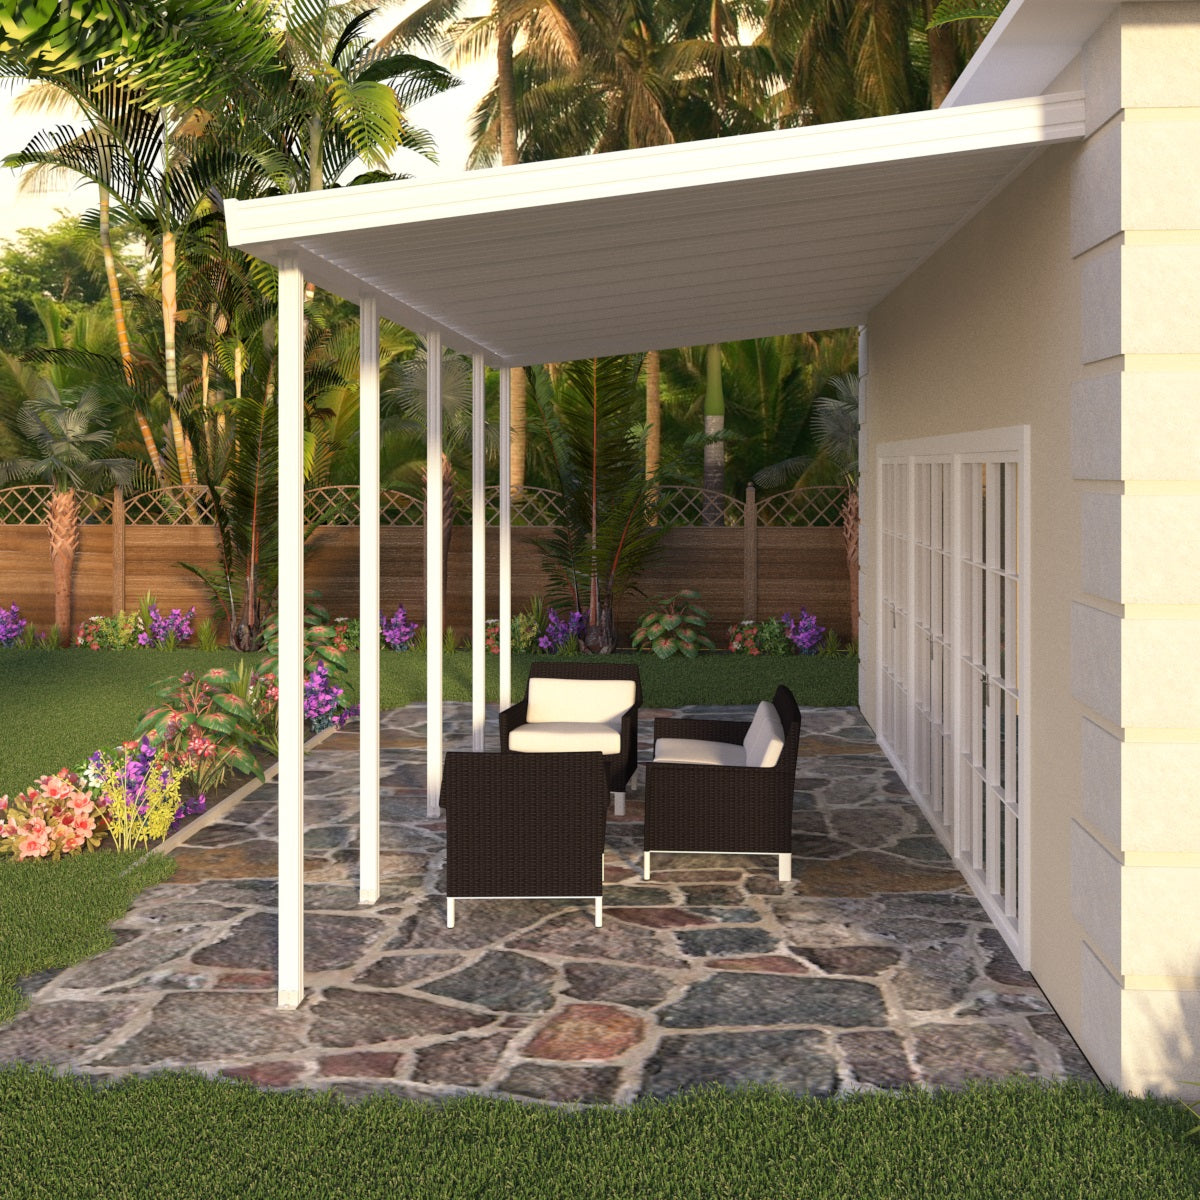 12 ft. Deep x 26 ft. Wide White Attached Aluminum Patio Cover -5 Posts - (20lb Low/Medium Snow Area)